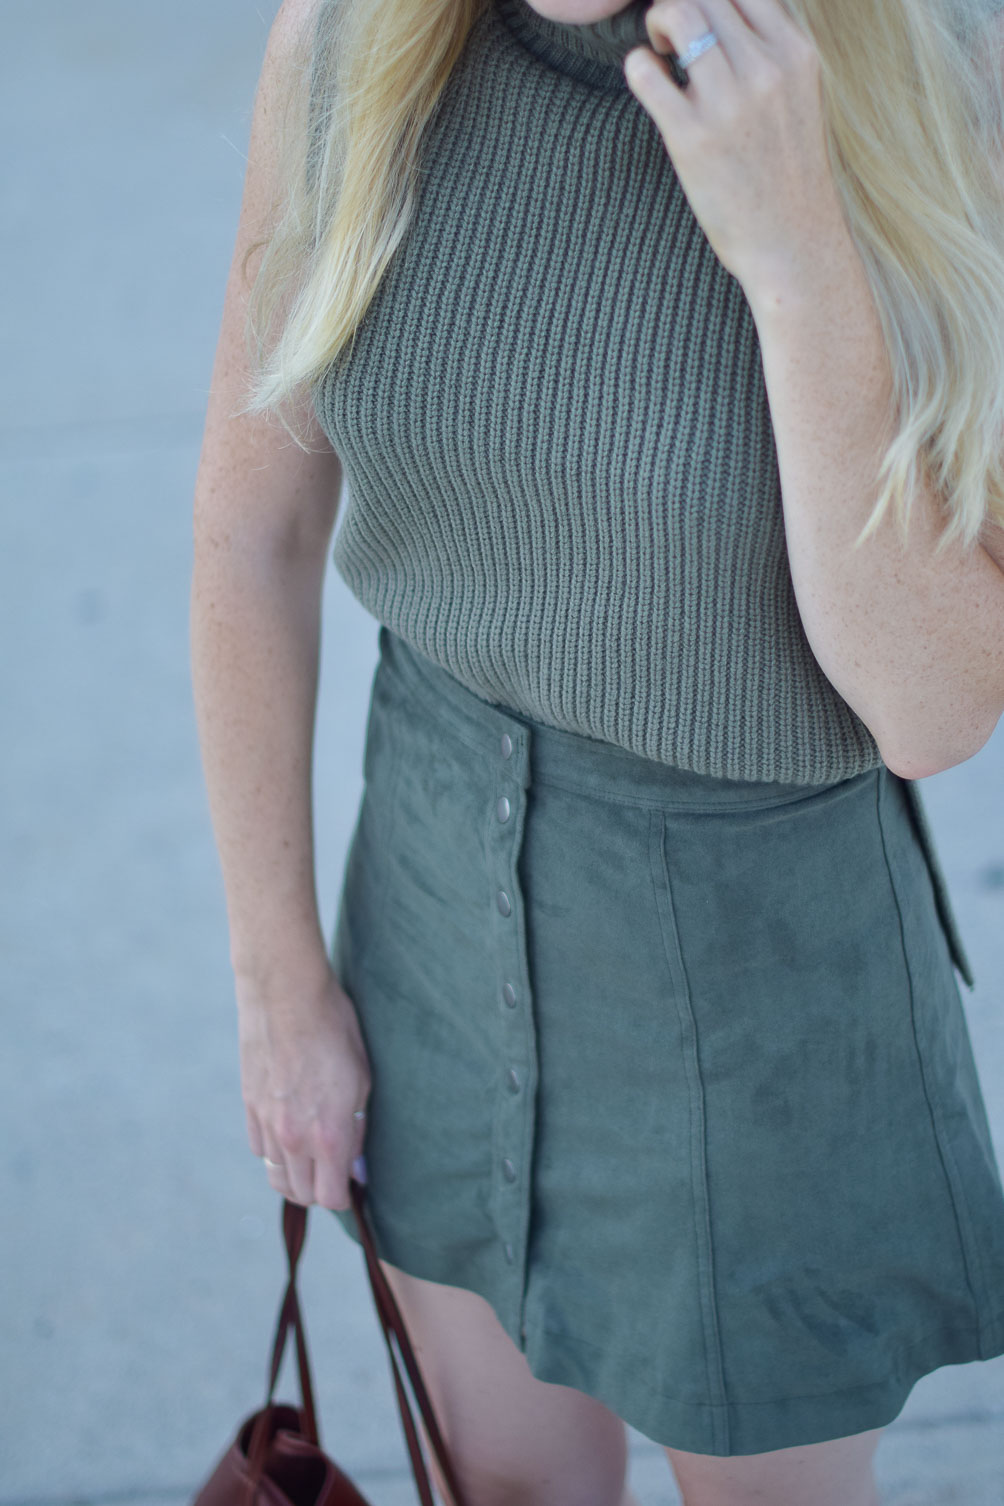 styling a suede skirt for fall with a cozy knit vest and leather tote bag on Leslie Musser of one brass fox